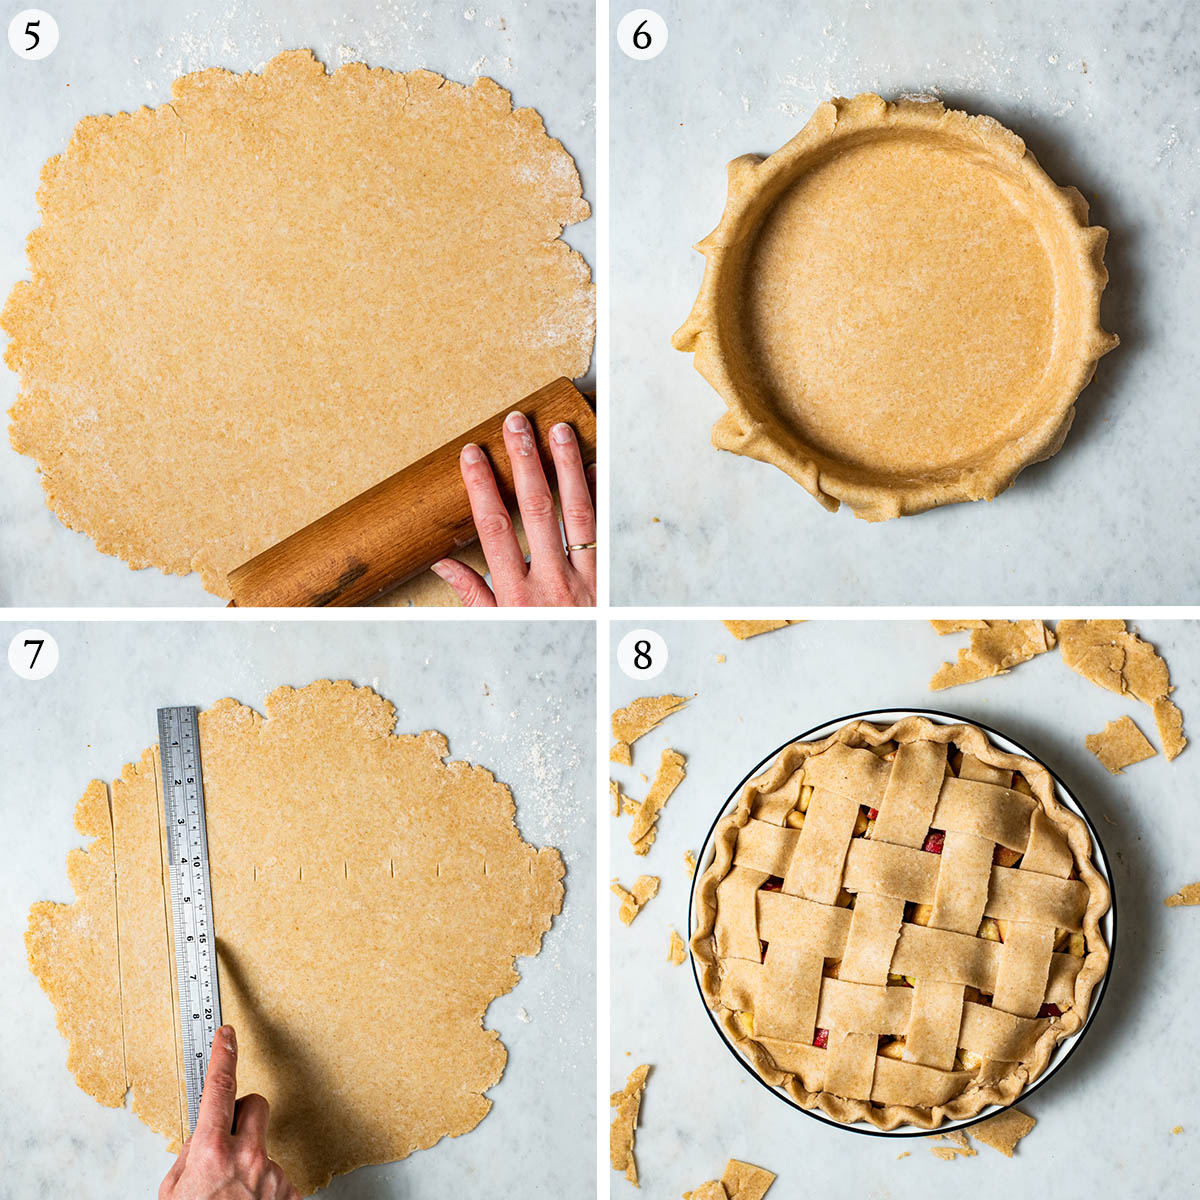 Pie dough steps 5 to 8, rolling out, placed into tin, and forming a lattice top.